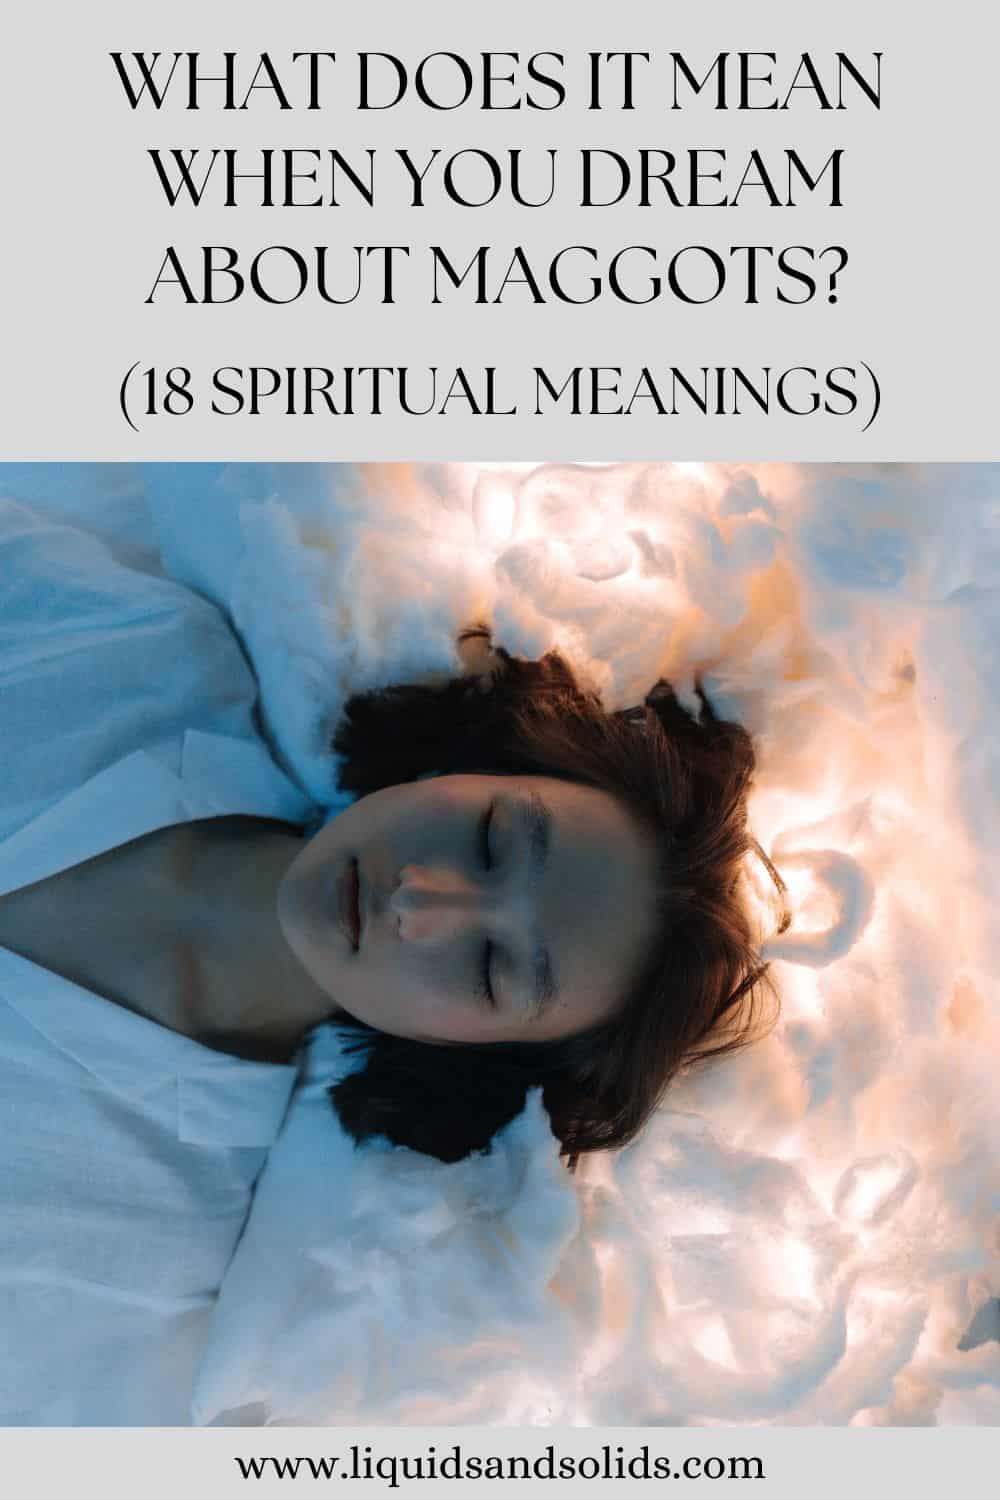 What Does It Mean When You Dream About Maggots? (18 Spiritual Meanings)